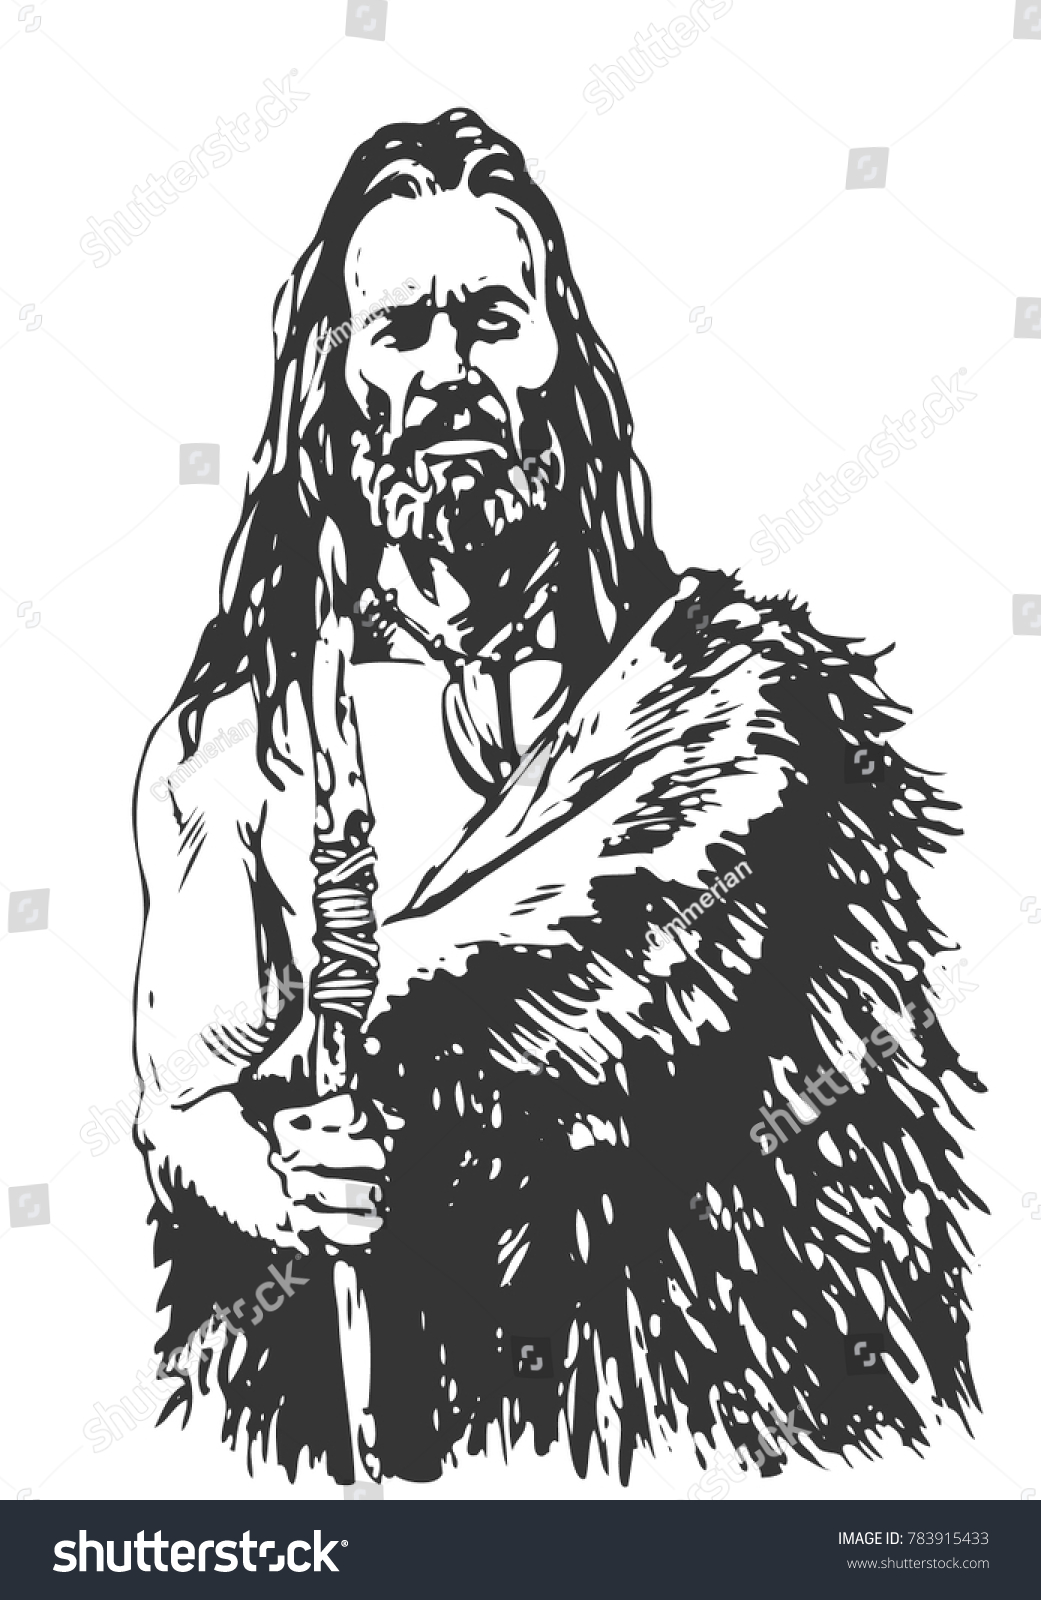 SVG of CRO-magnon in the skin of the beast with a spear svg